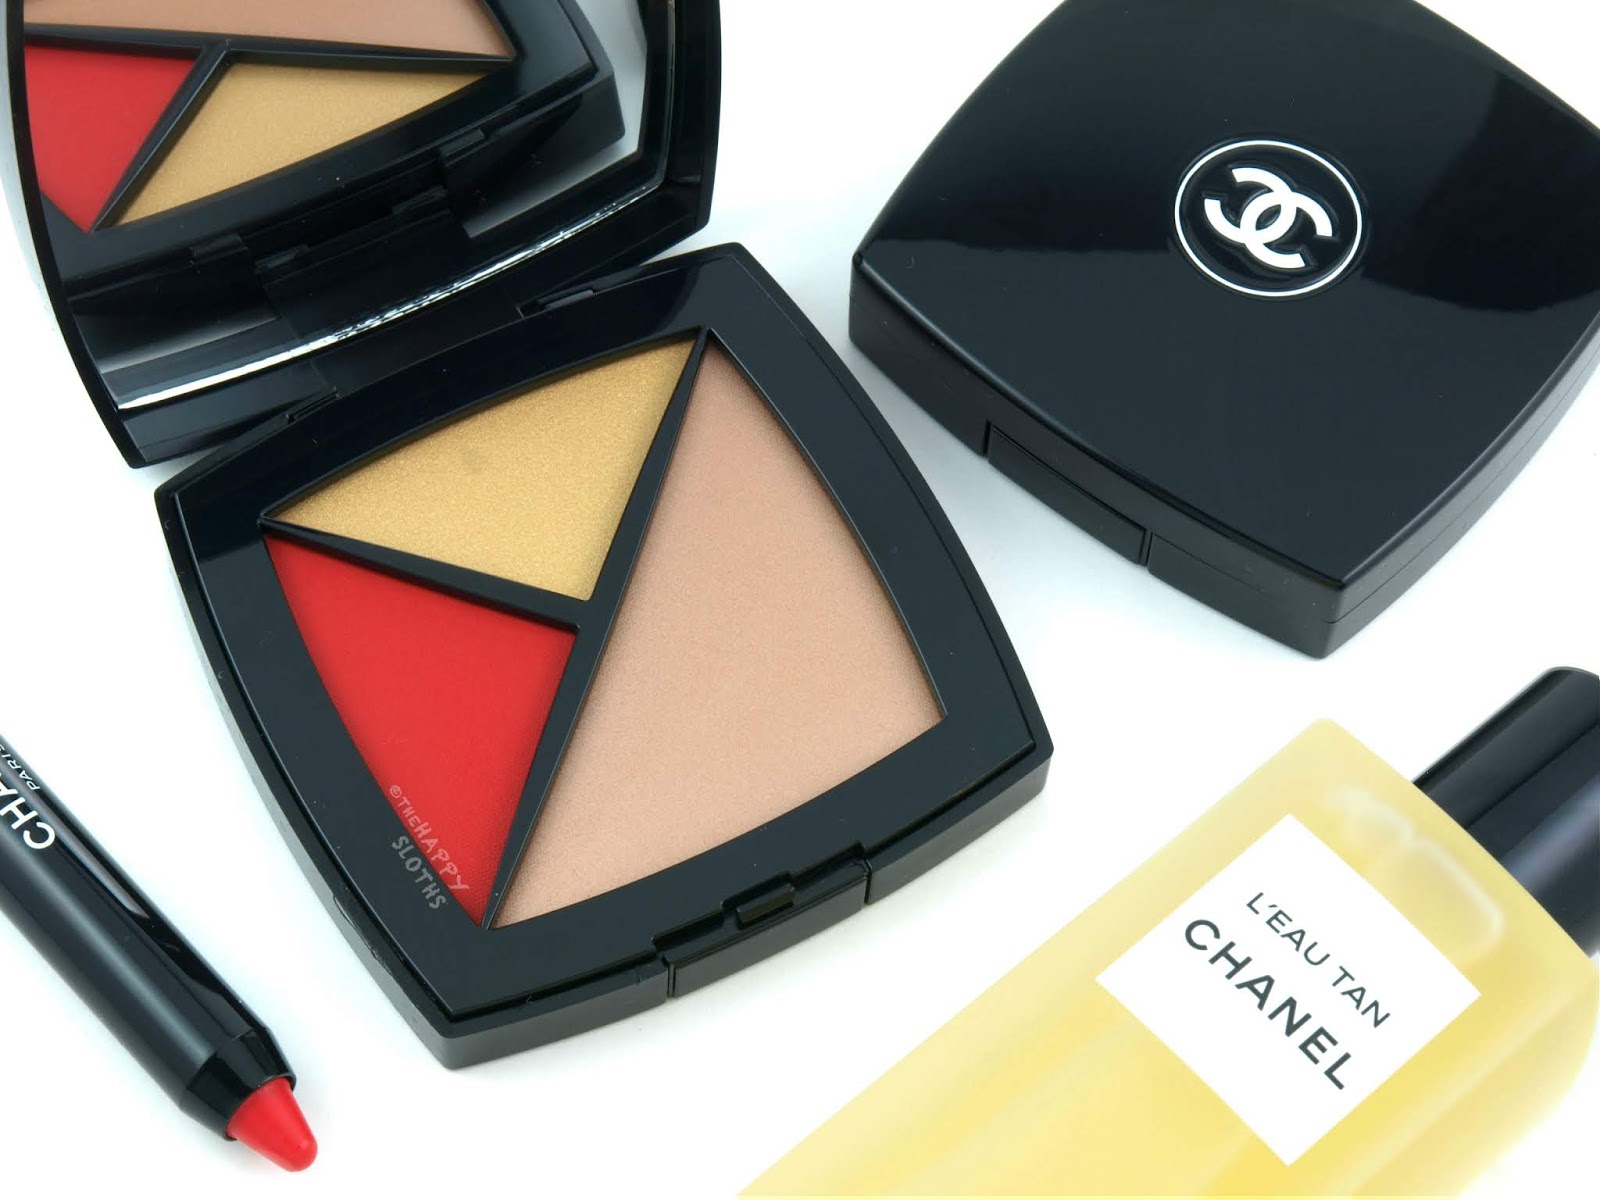 Chanel Cruise 2018 | Palette Essentielle Ete in "190 Eclat Solaire": Review and Swatches